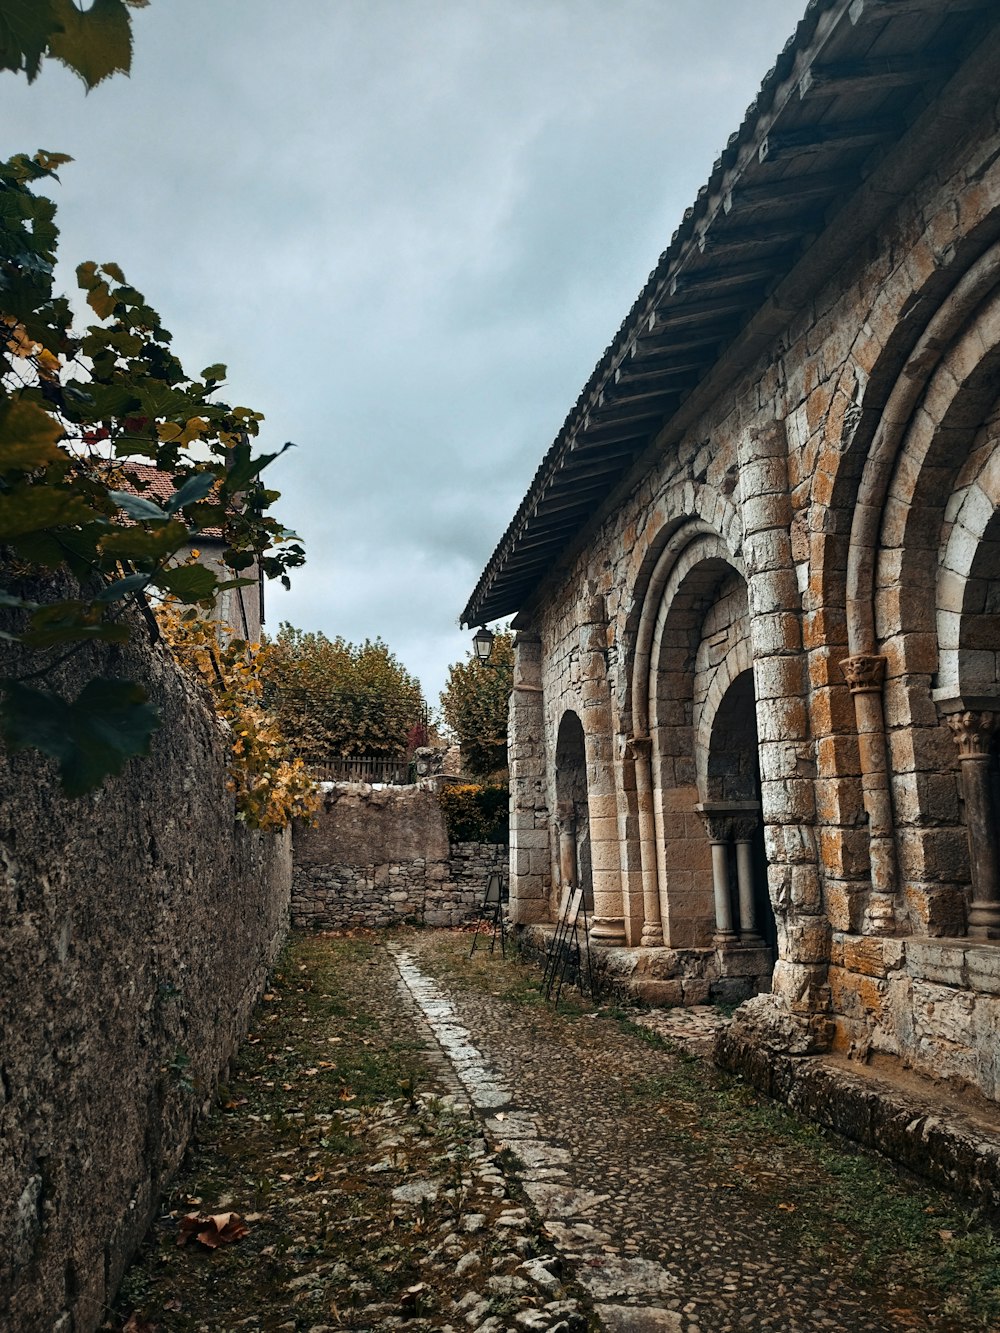 a stone building with arches and a stone walkway